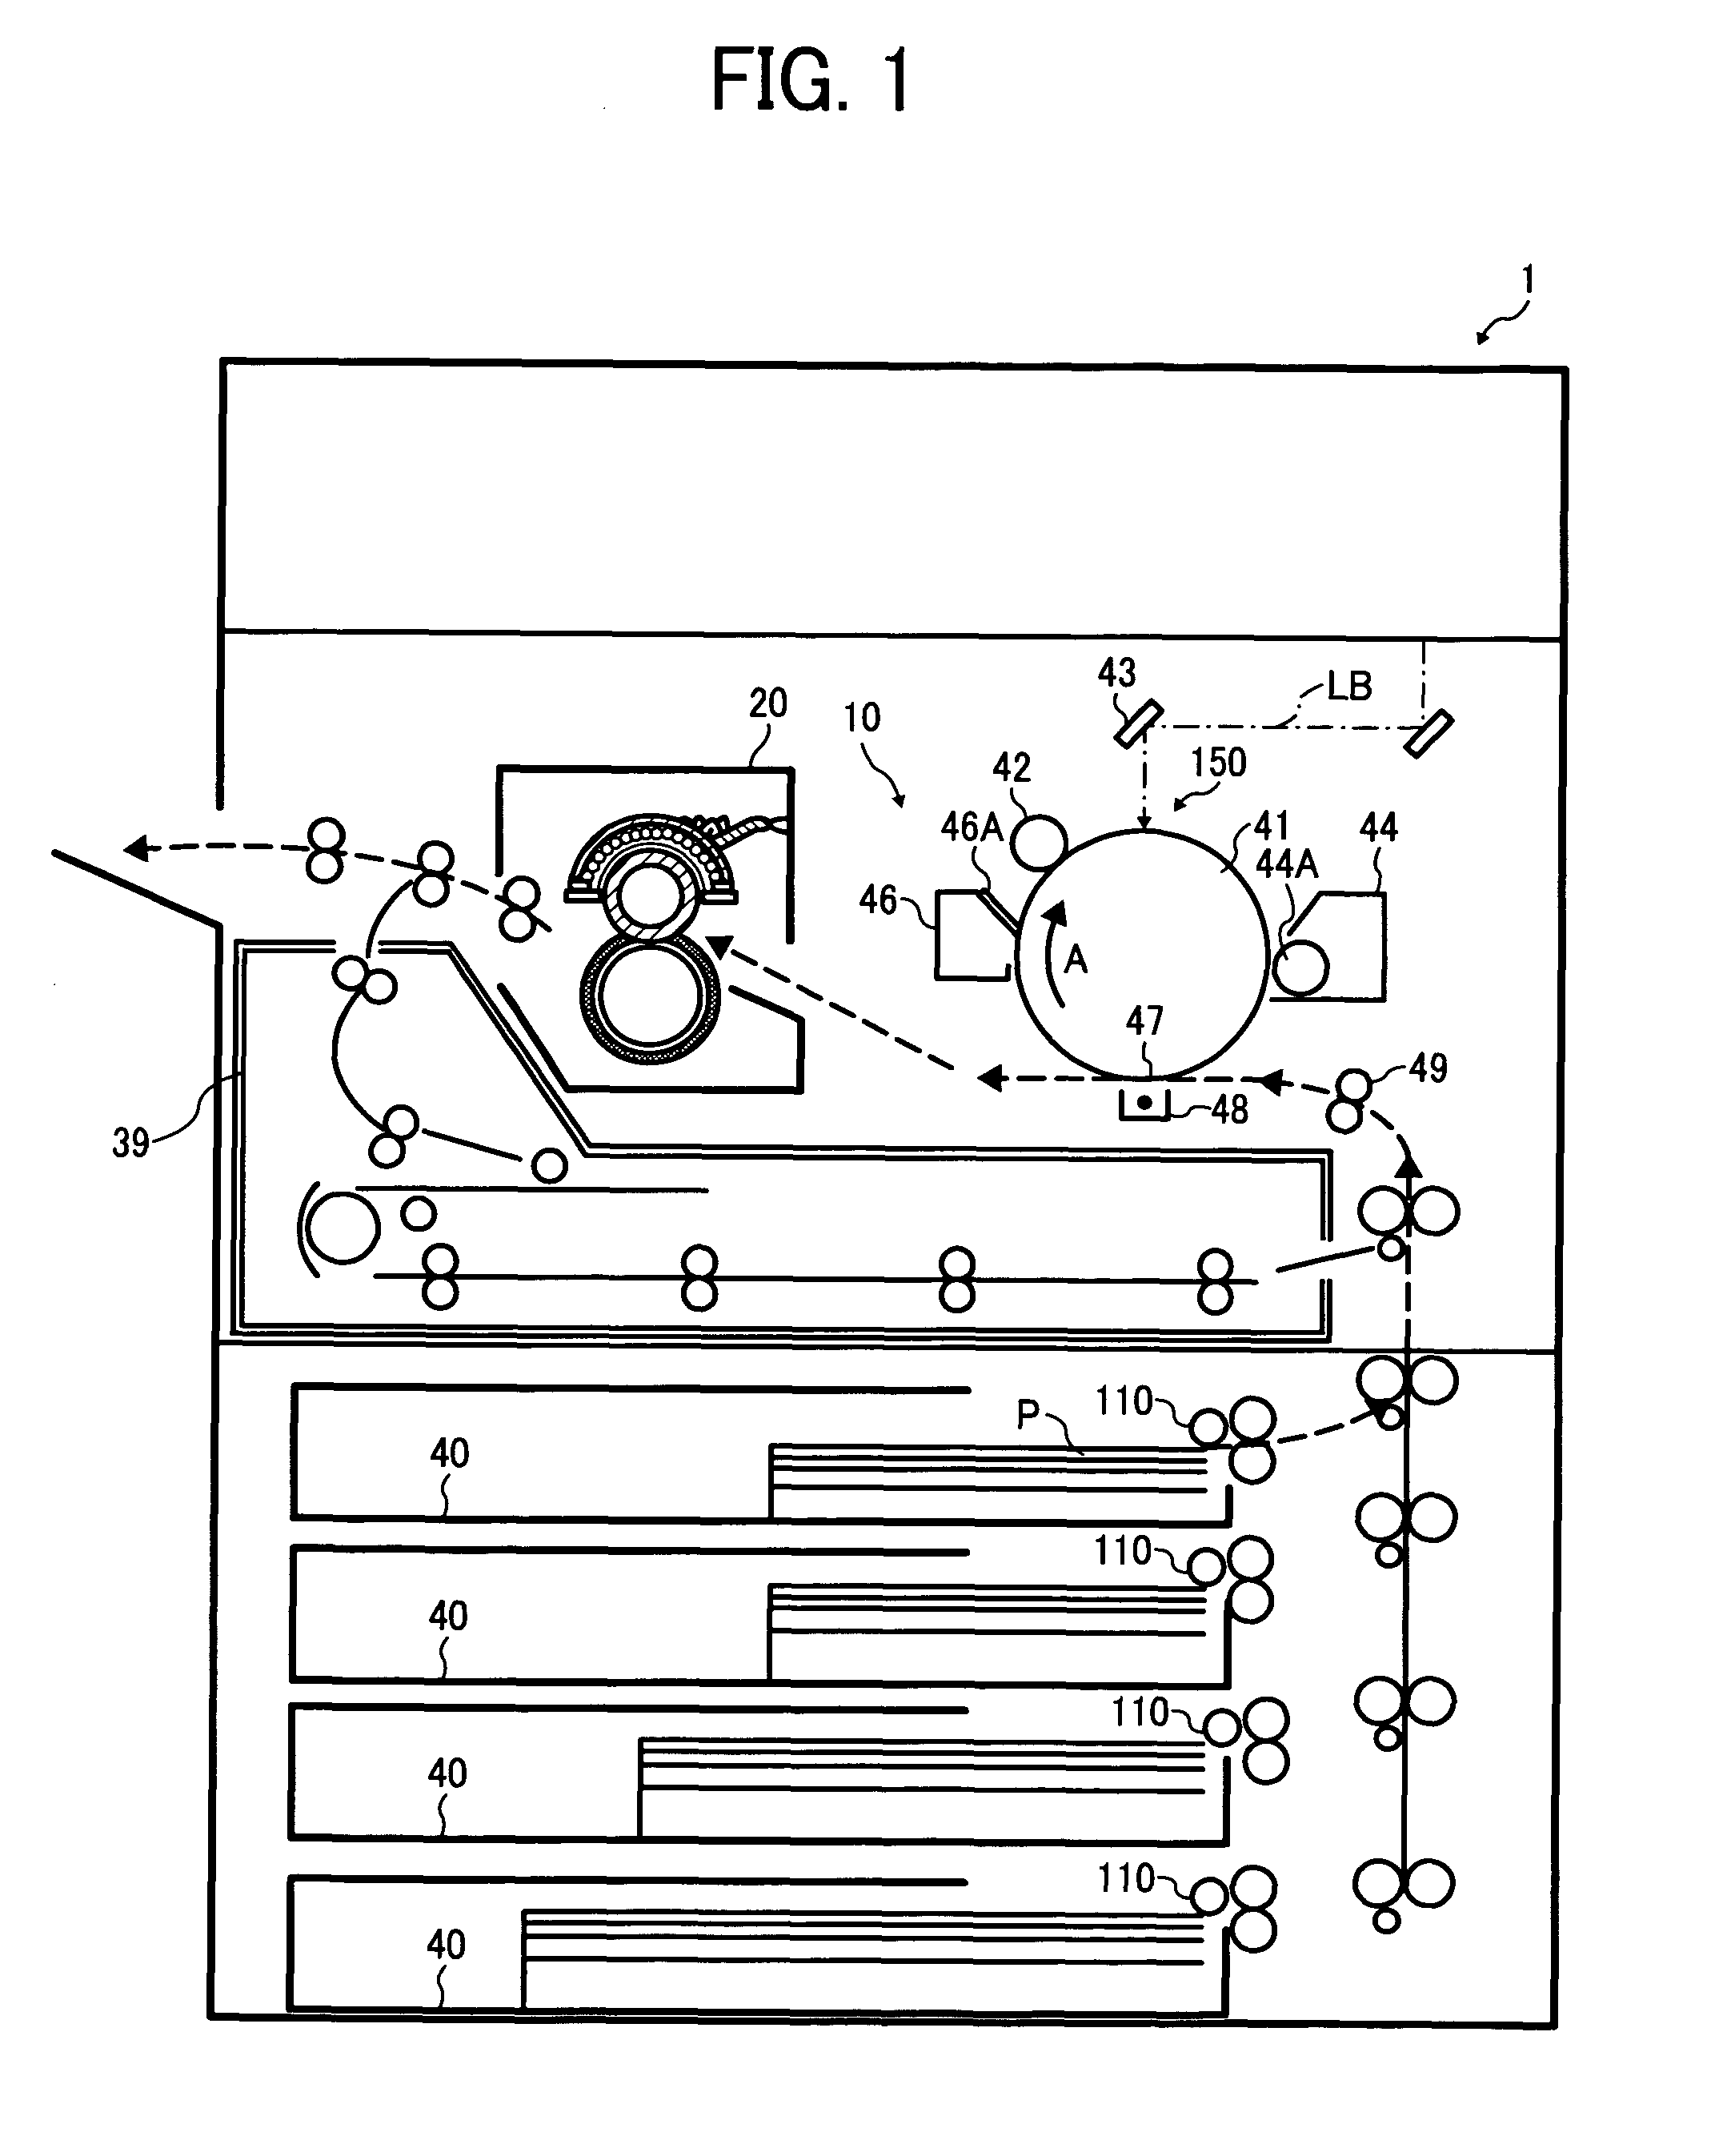 Fixing device, image forming apparatus including the fixing device, and fixing method